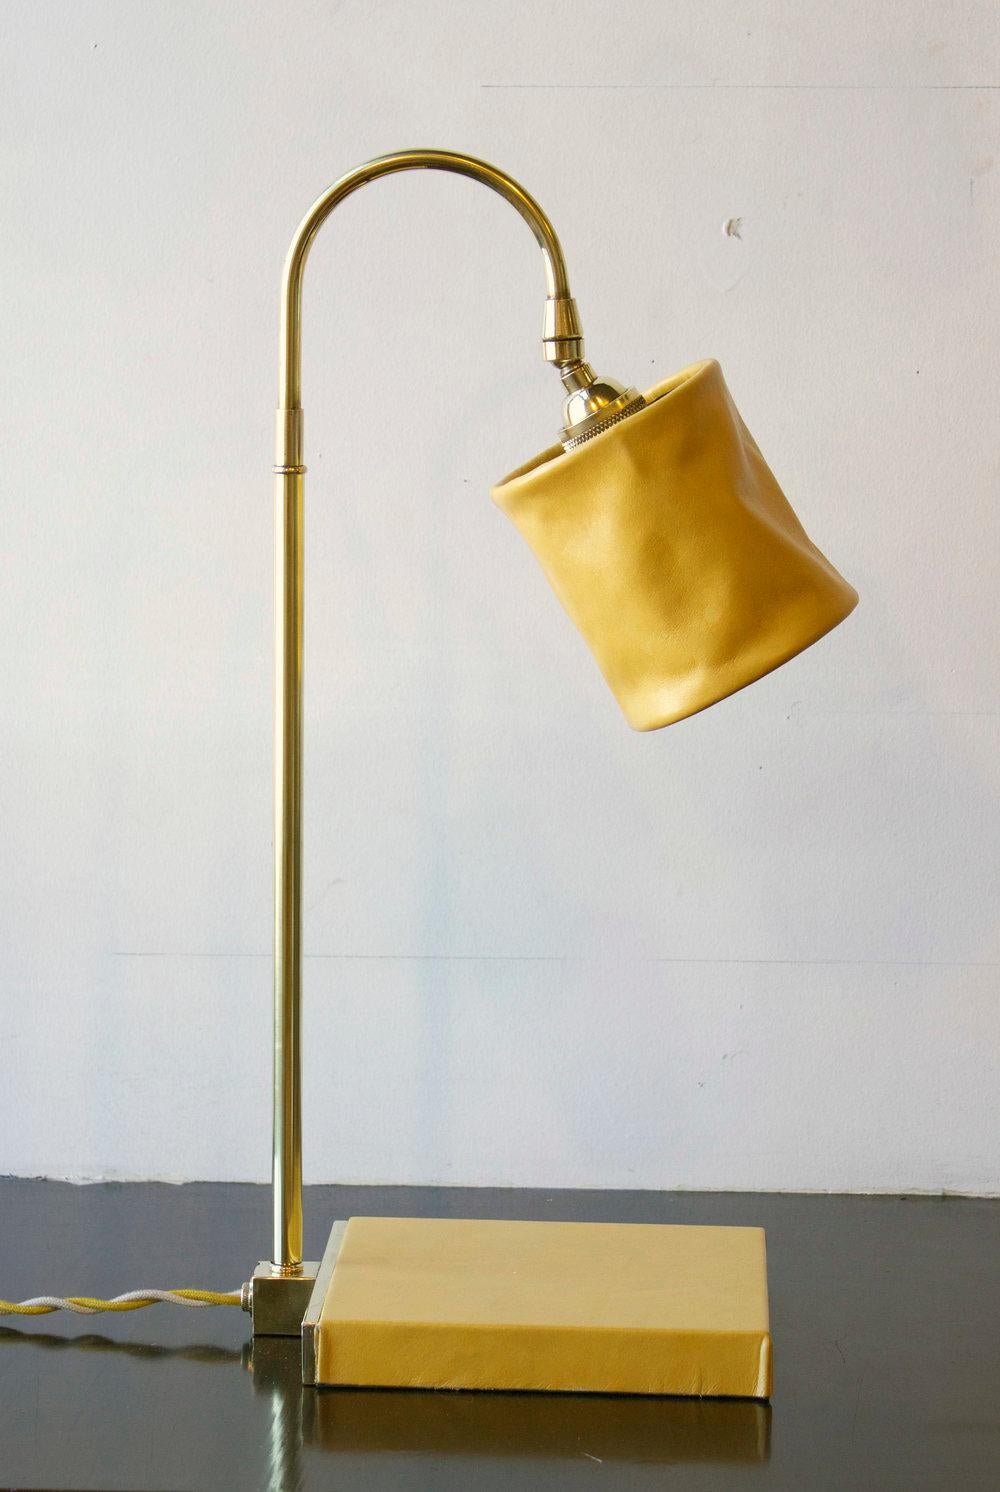 Series01 Desk Lamp, Hand-Dyed Blush 'Pink' Leather, Polished Nickel-Plated Brass For Sale 3